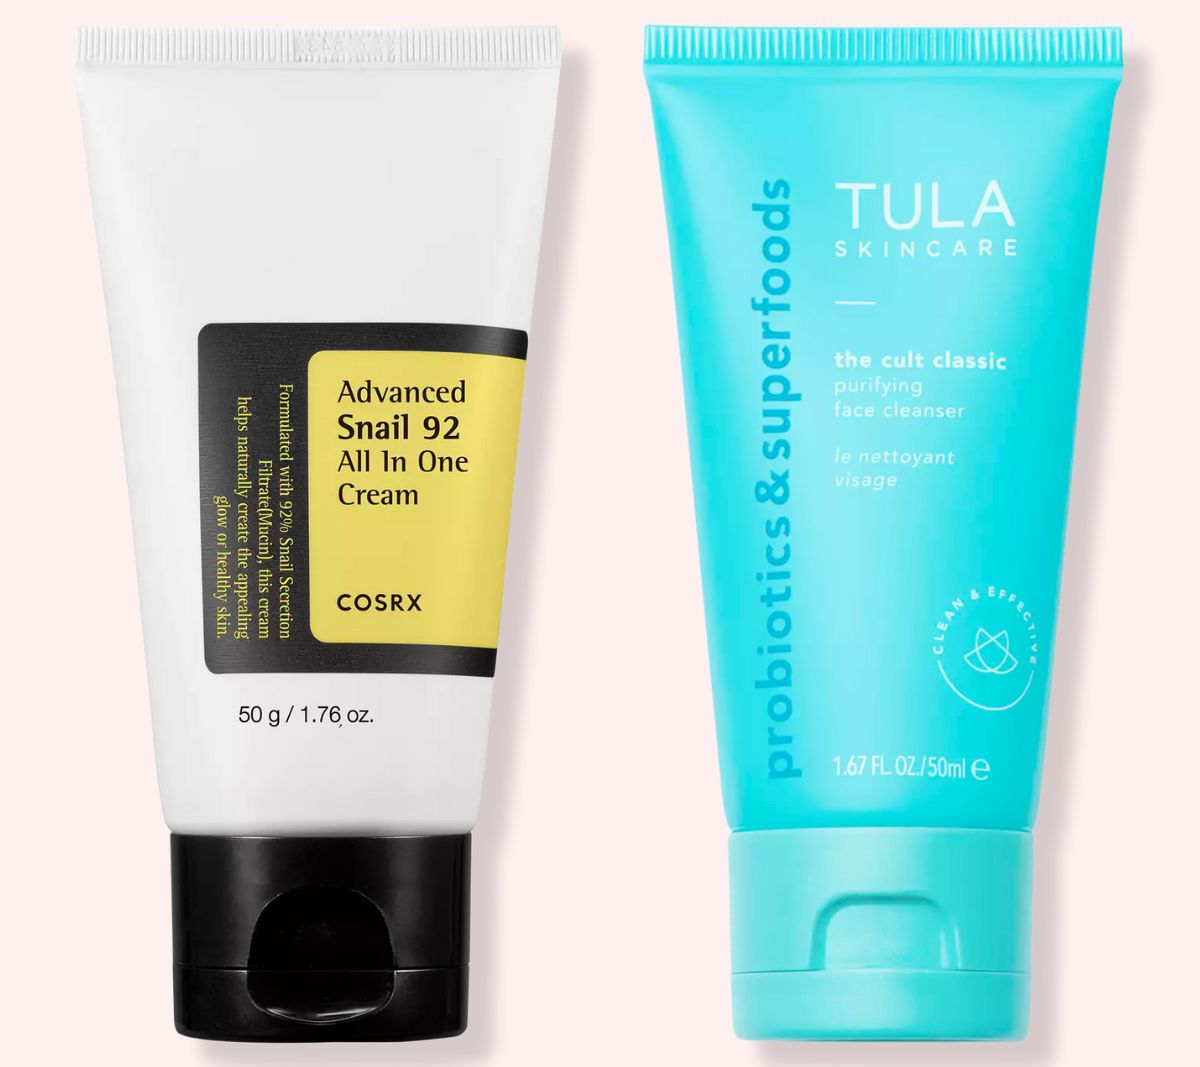 COSRX Advanced Snail 92 Facial Moisturizer - and TULA SKINCARE The Cult Classic Purifying Face Cleanser product images